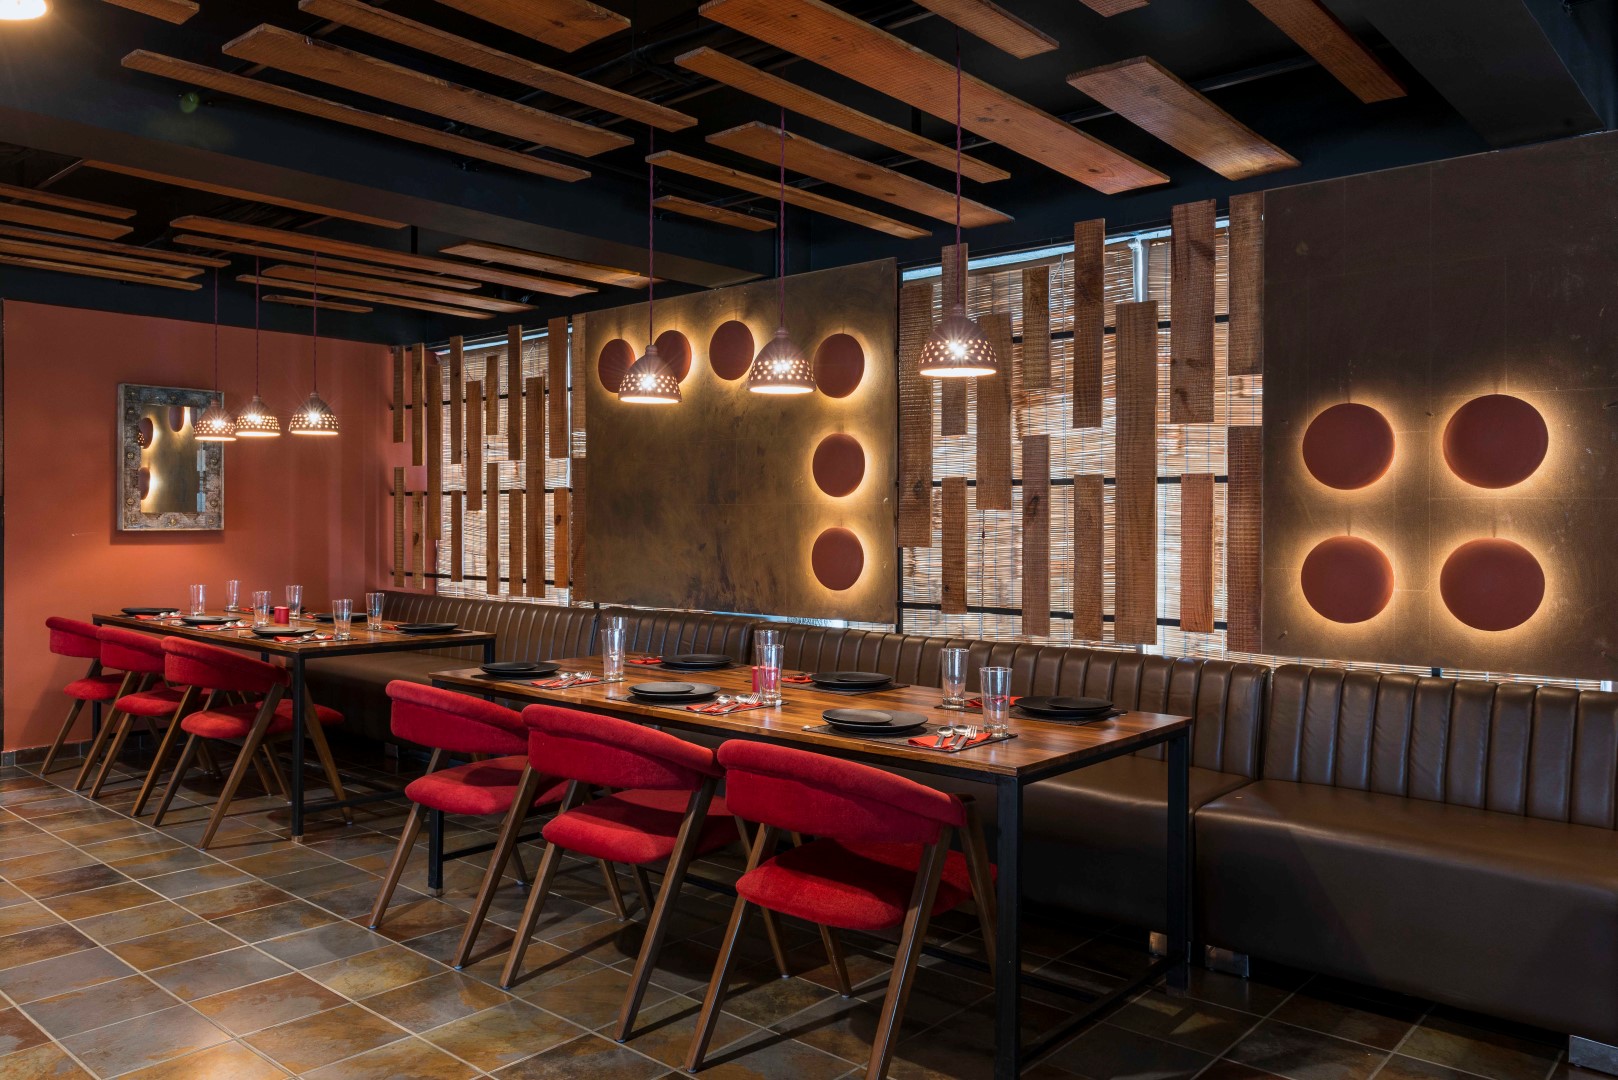 Best Restaurant Interior Design In India (6) The Architects Diary